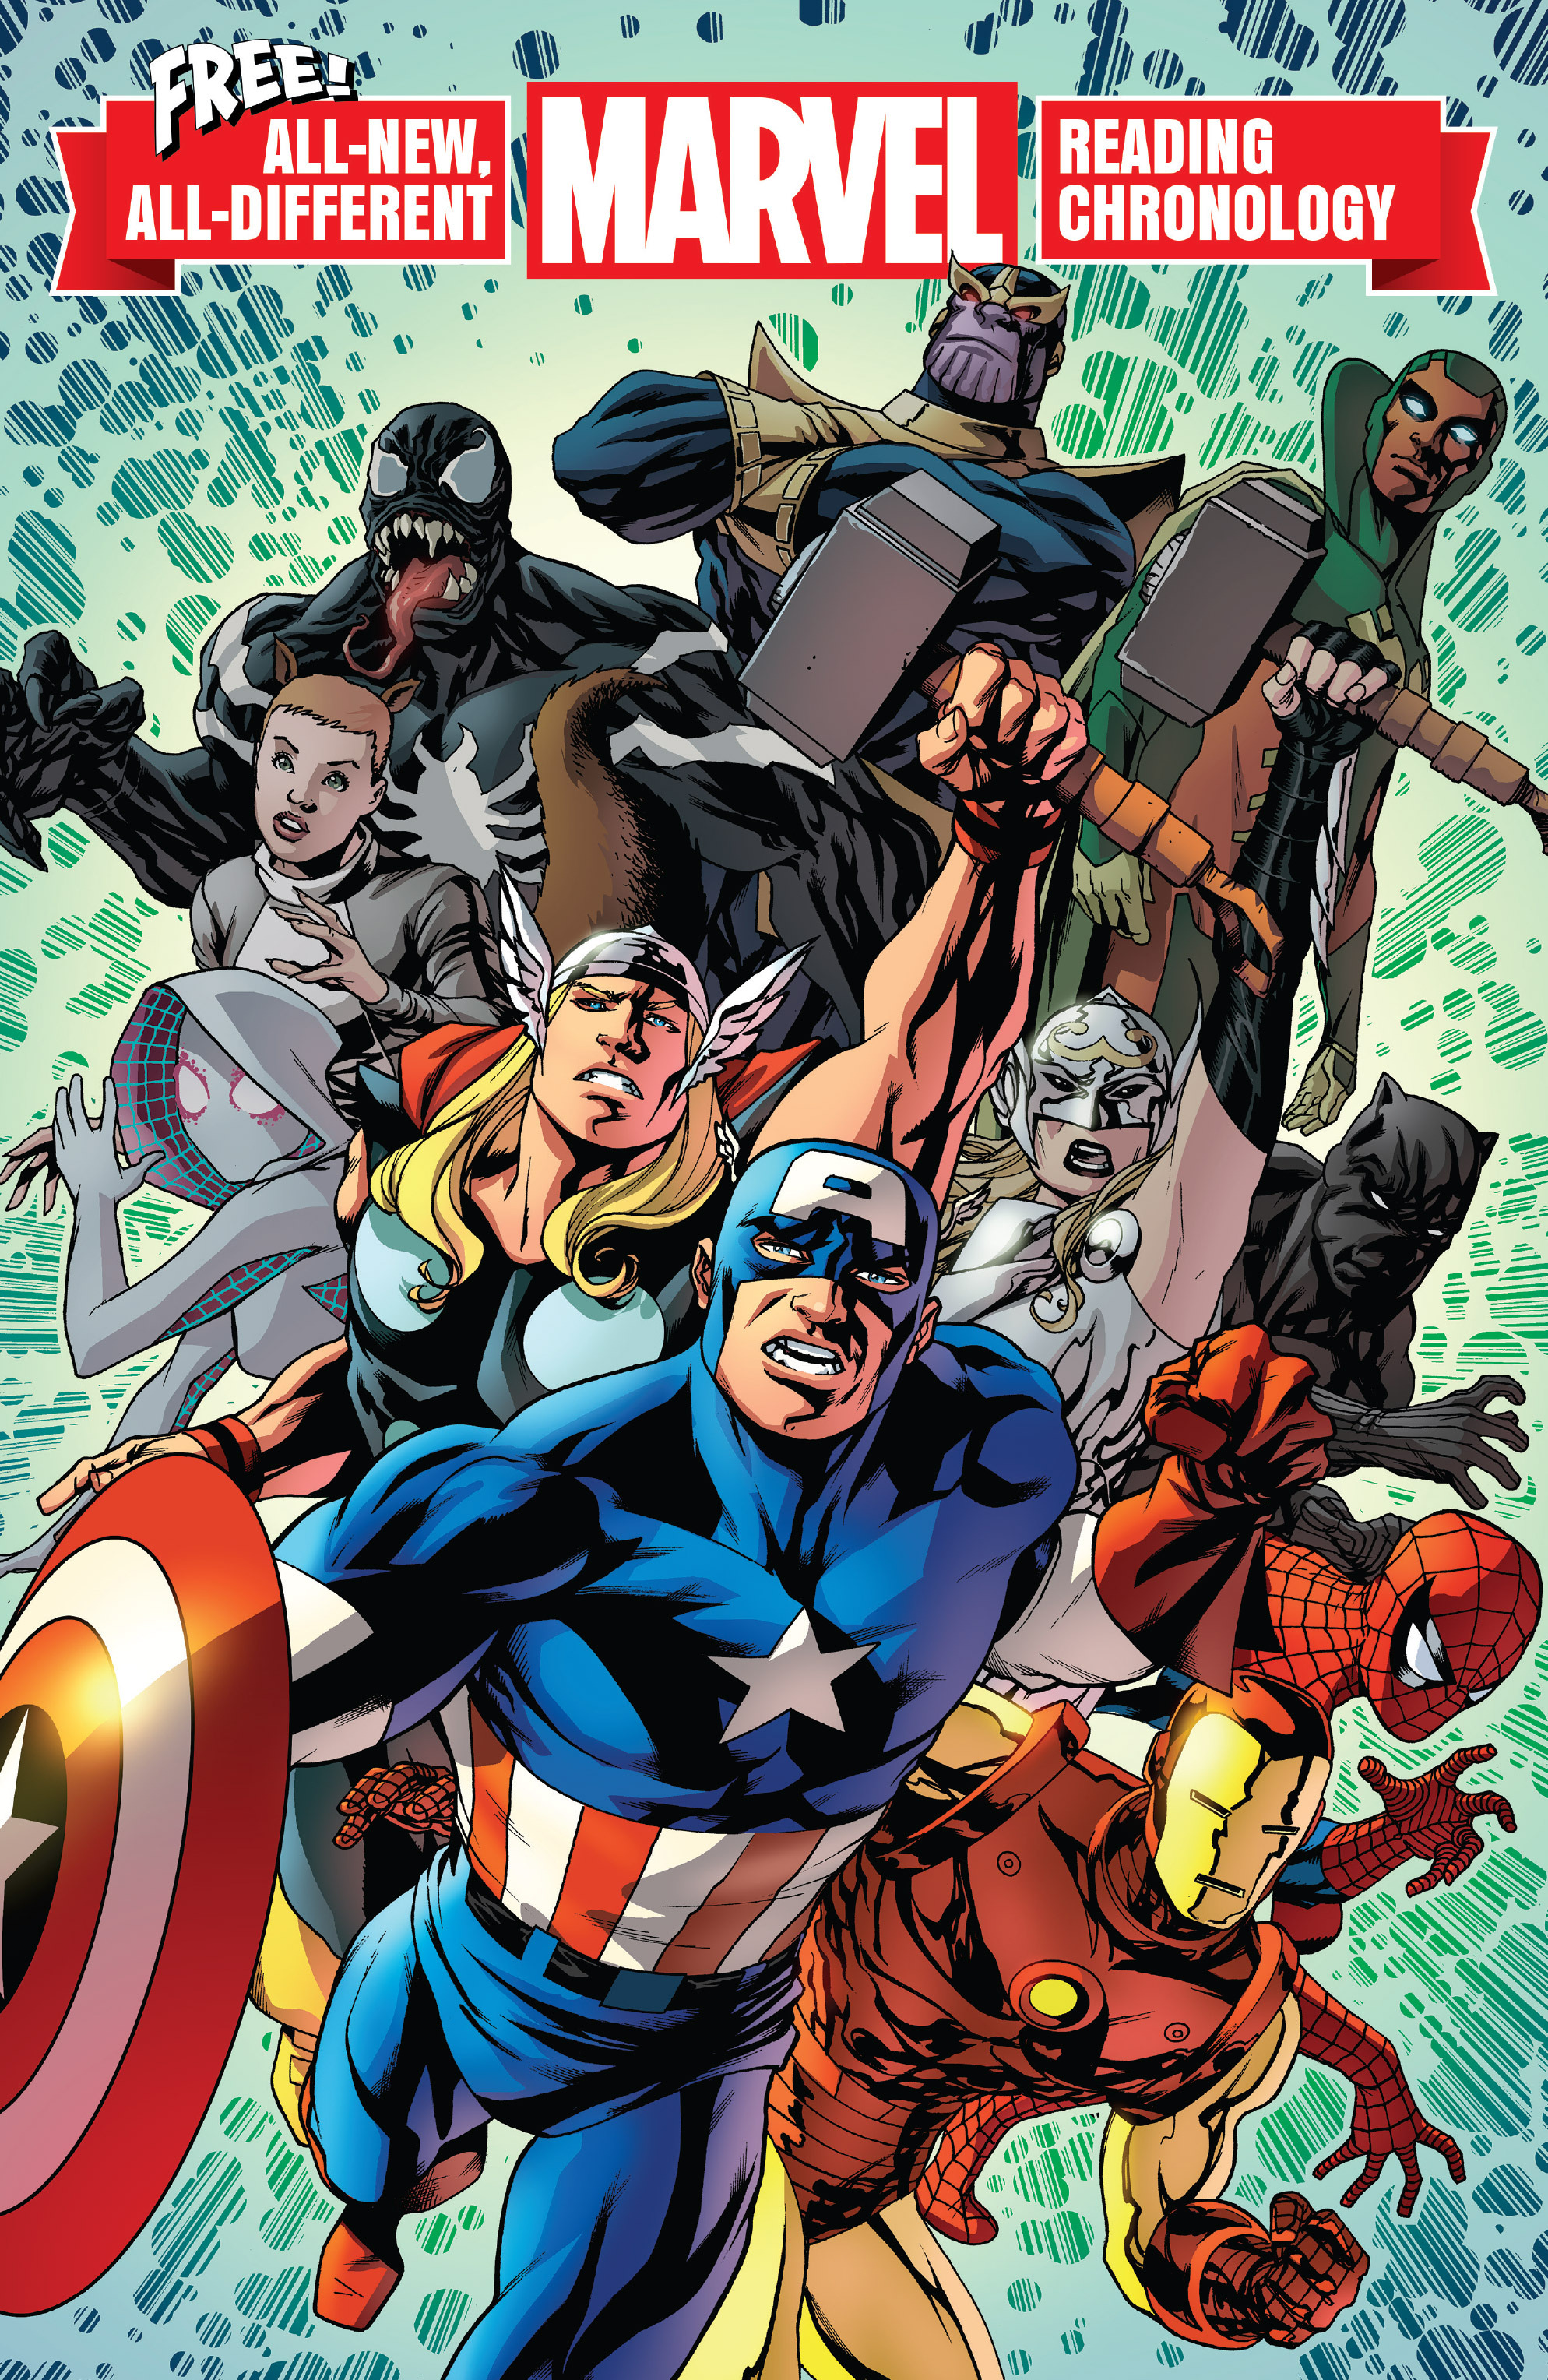 Read online All-New, All-Different Marvel Reading Chronology comic -  Issue # Full - 1